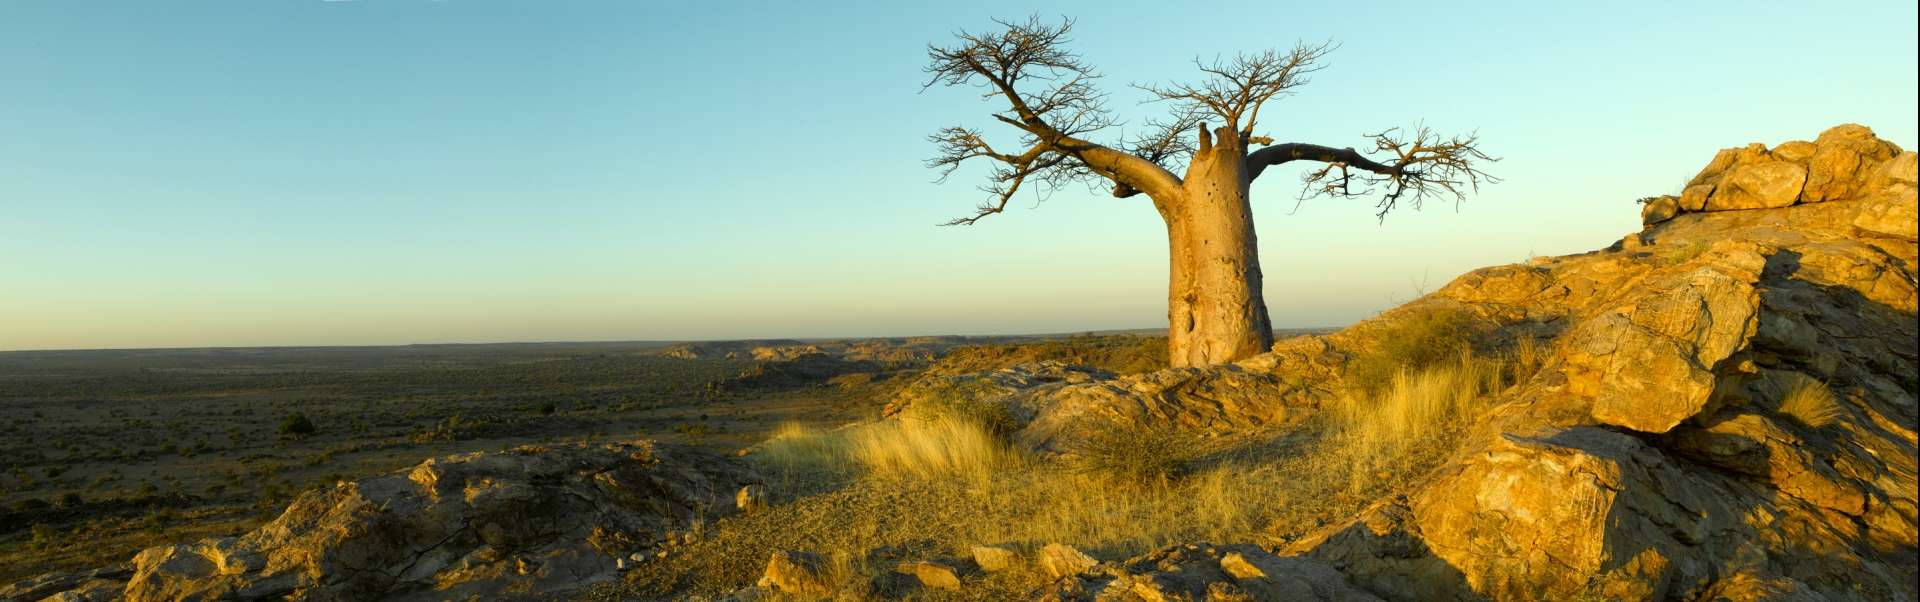 Historic baobab trees can be see throughout Botswana